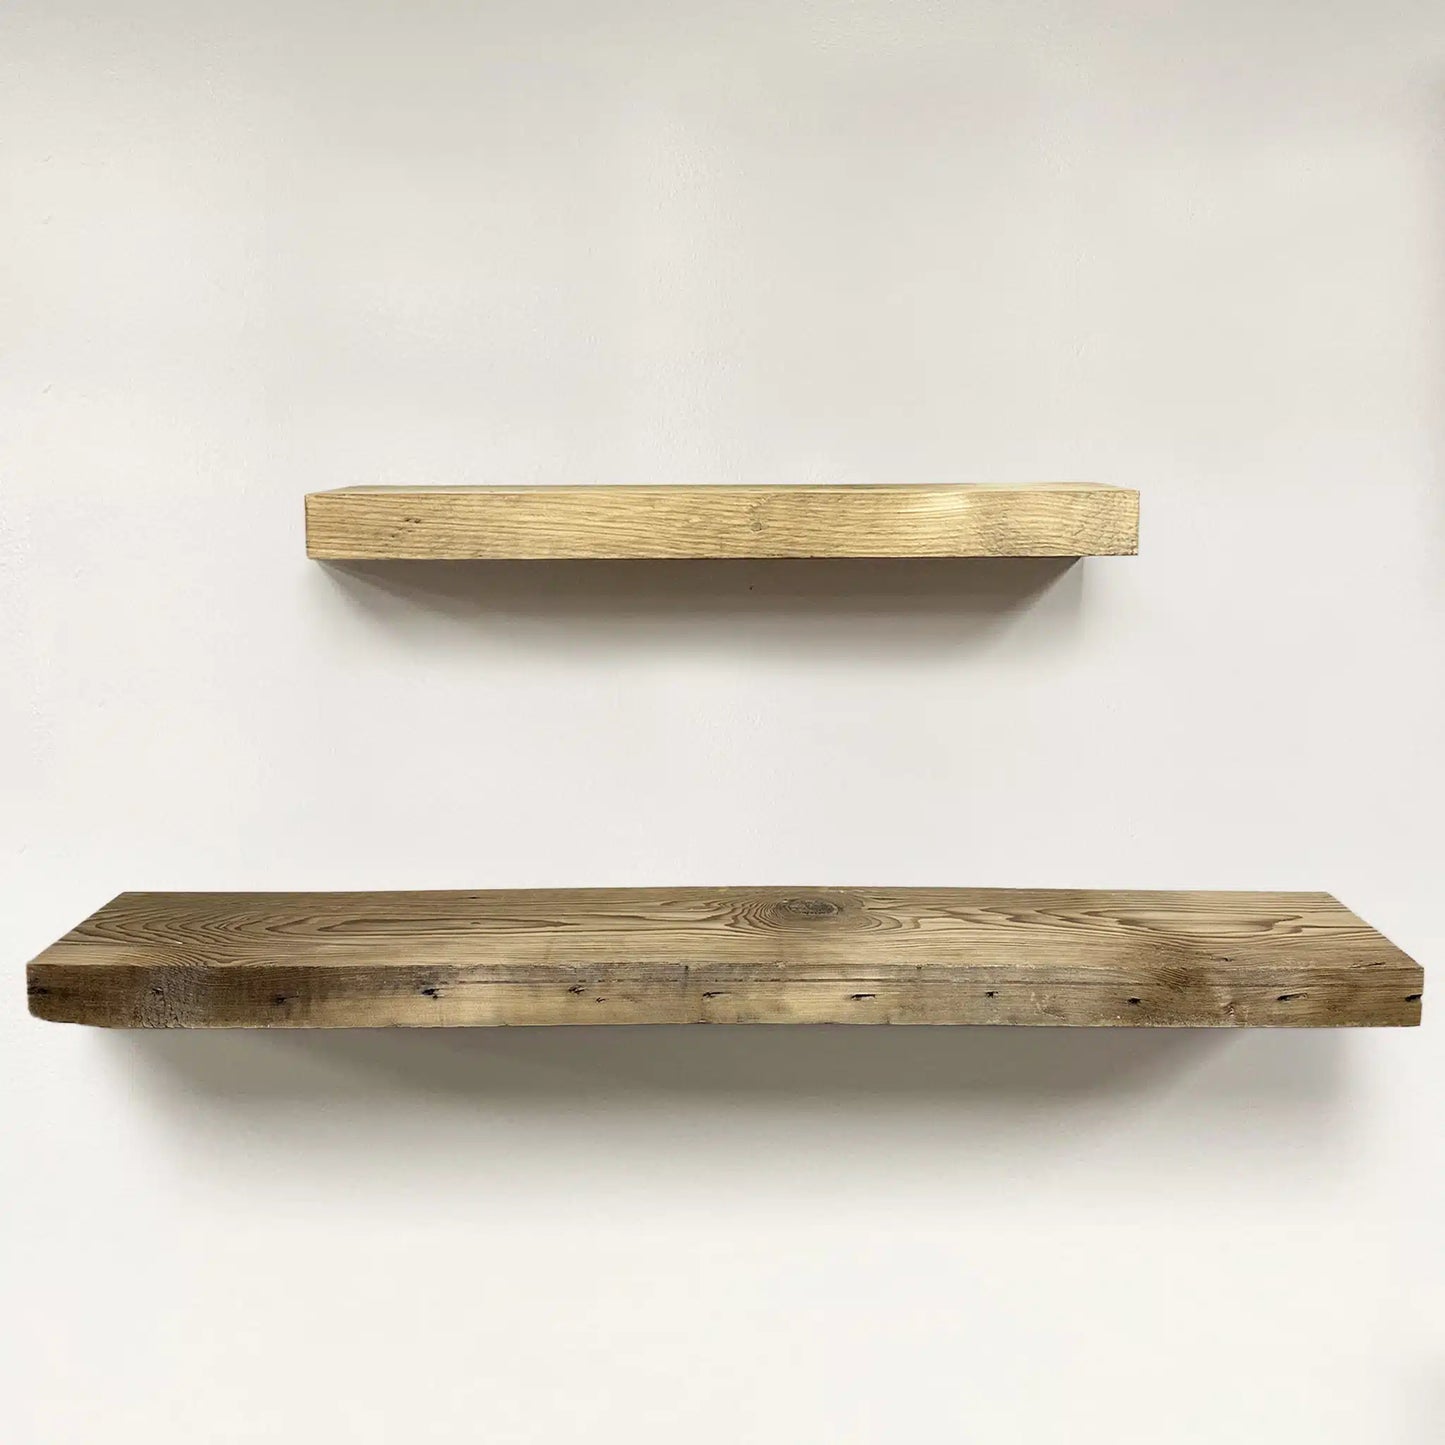 two reclaimed wood floating shelves in the unfinished option. Grain patterns, knots, and nail holes are shown in the wood.